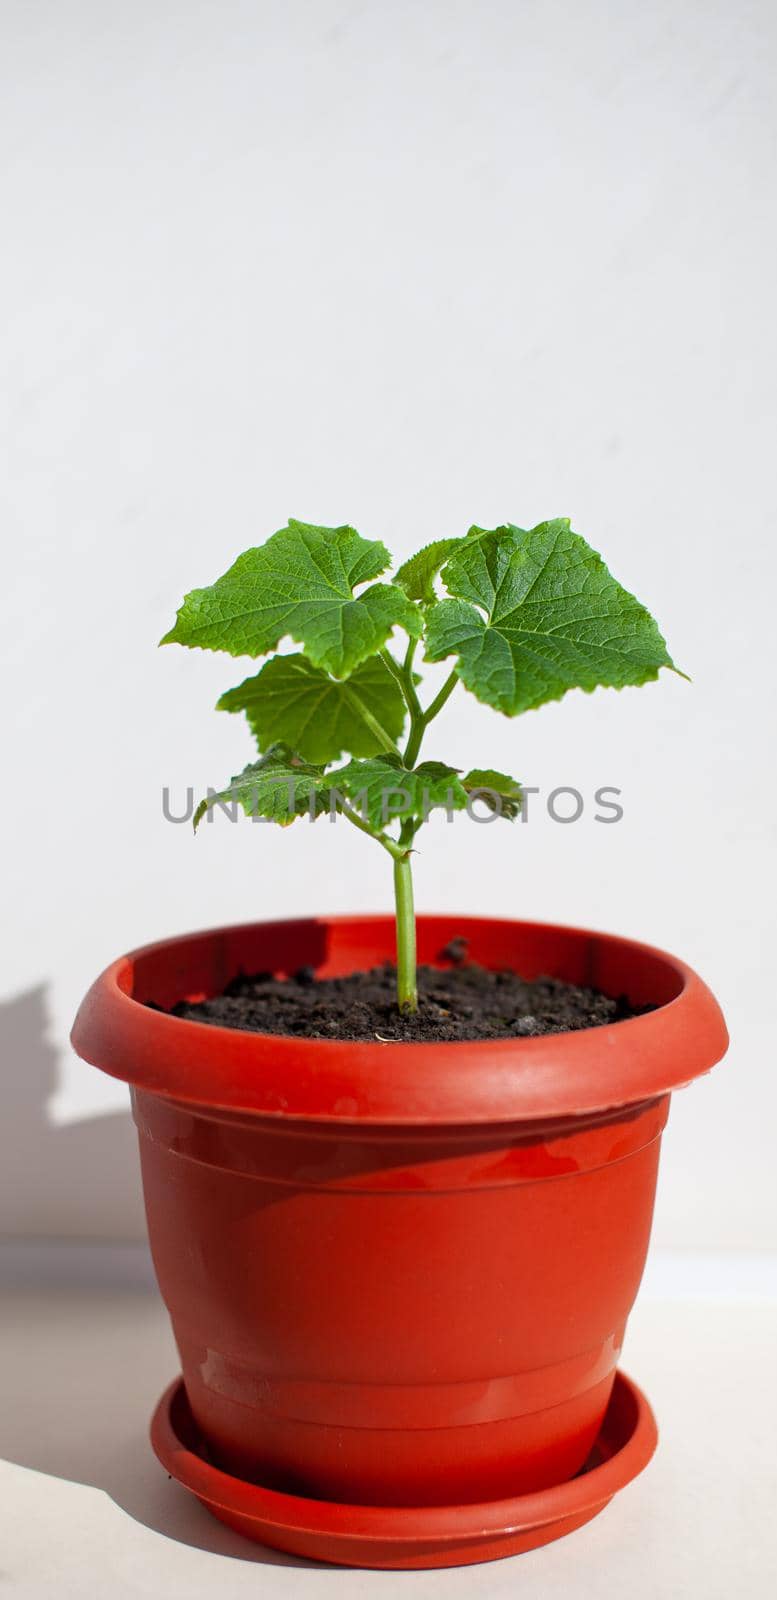 One young cucumber seedling in a pot on a white background. Seedlings grown on the window. The concept of organic food. Vegetarian food.